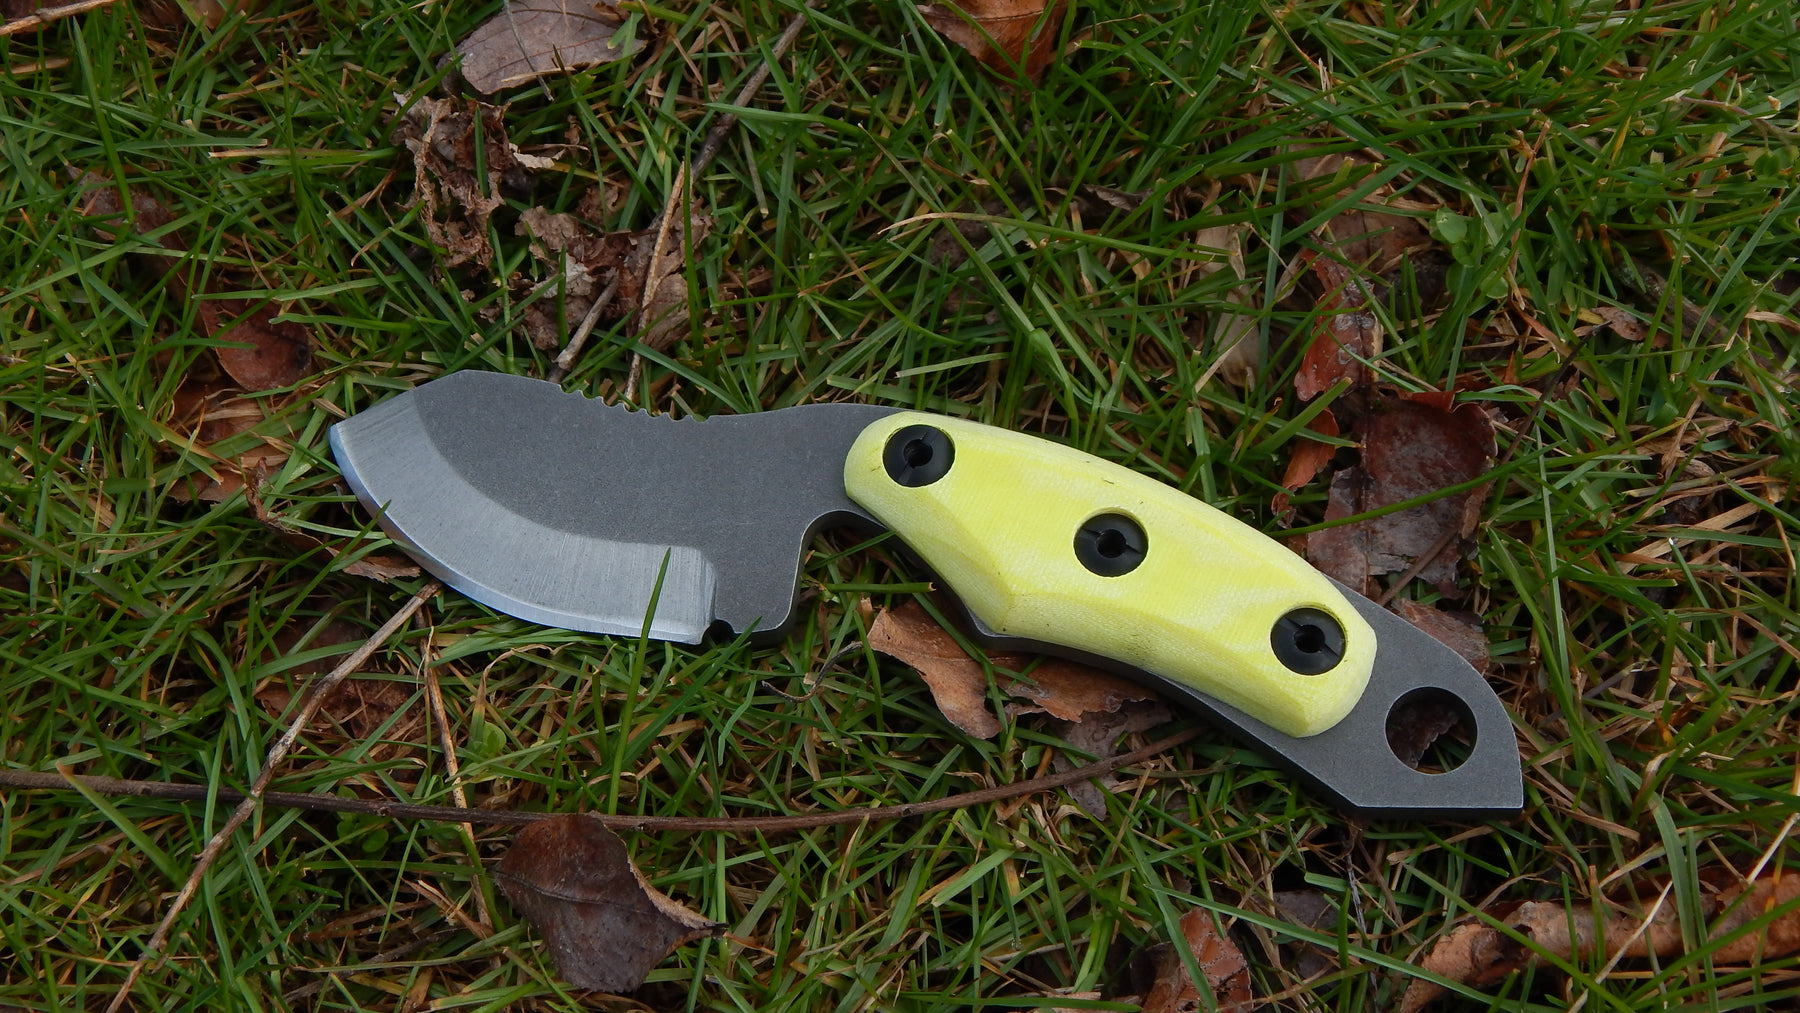 2023 Shed Knives Resilience - Durable fixed blade knife with curved handle and stone wash blade finish.